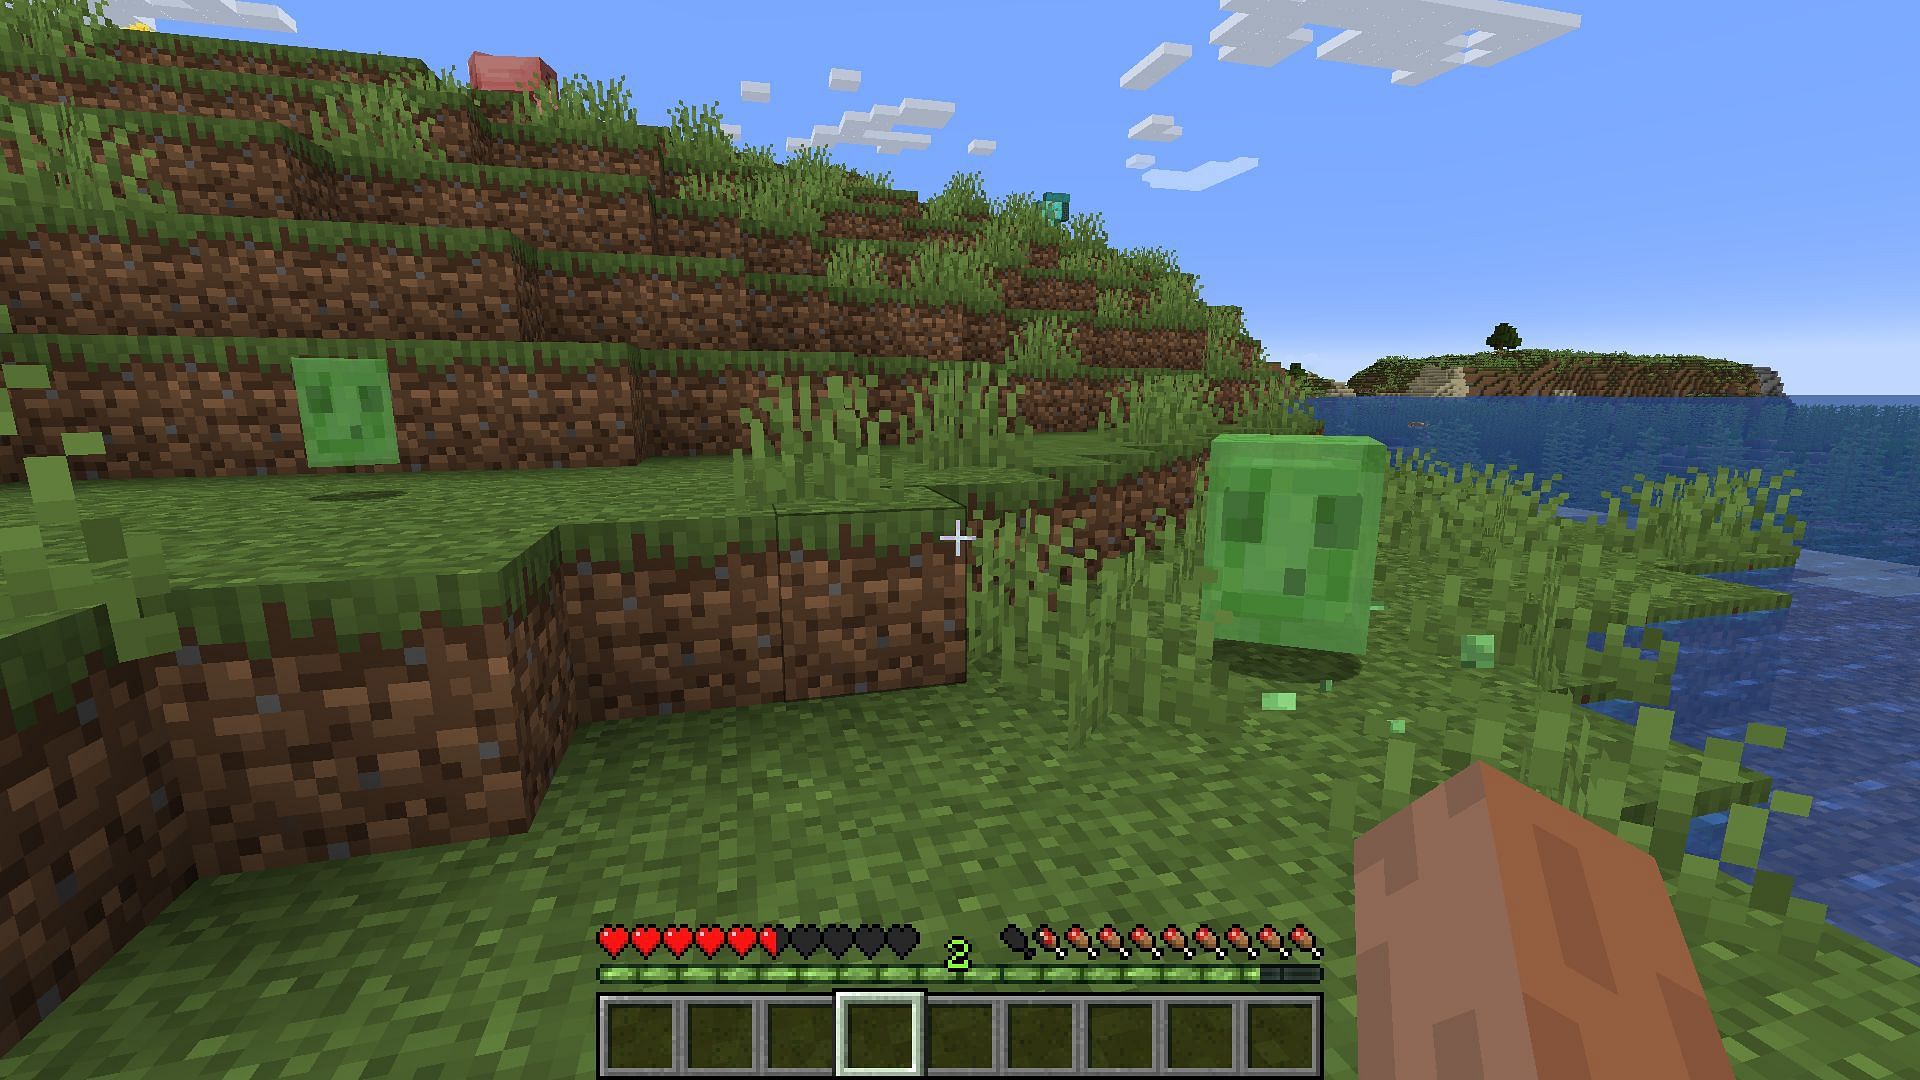 A theoretical size eight slime would move faster than the player (Image via Mojang Studios)